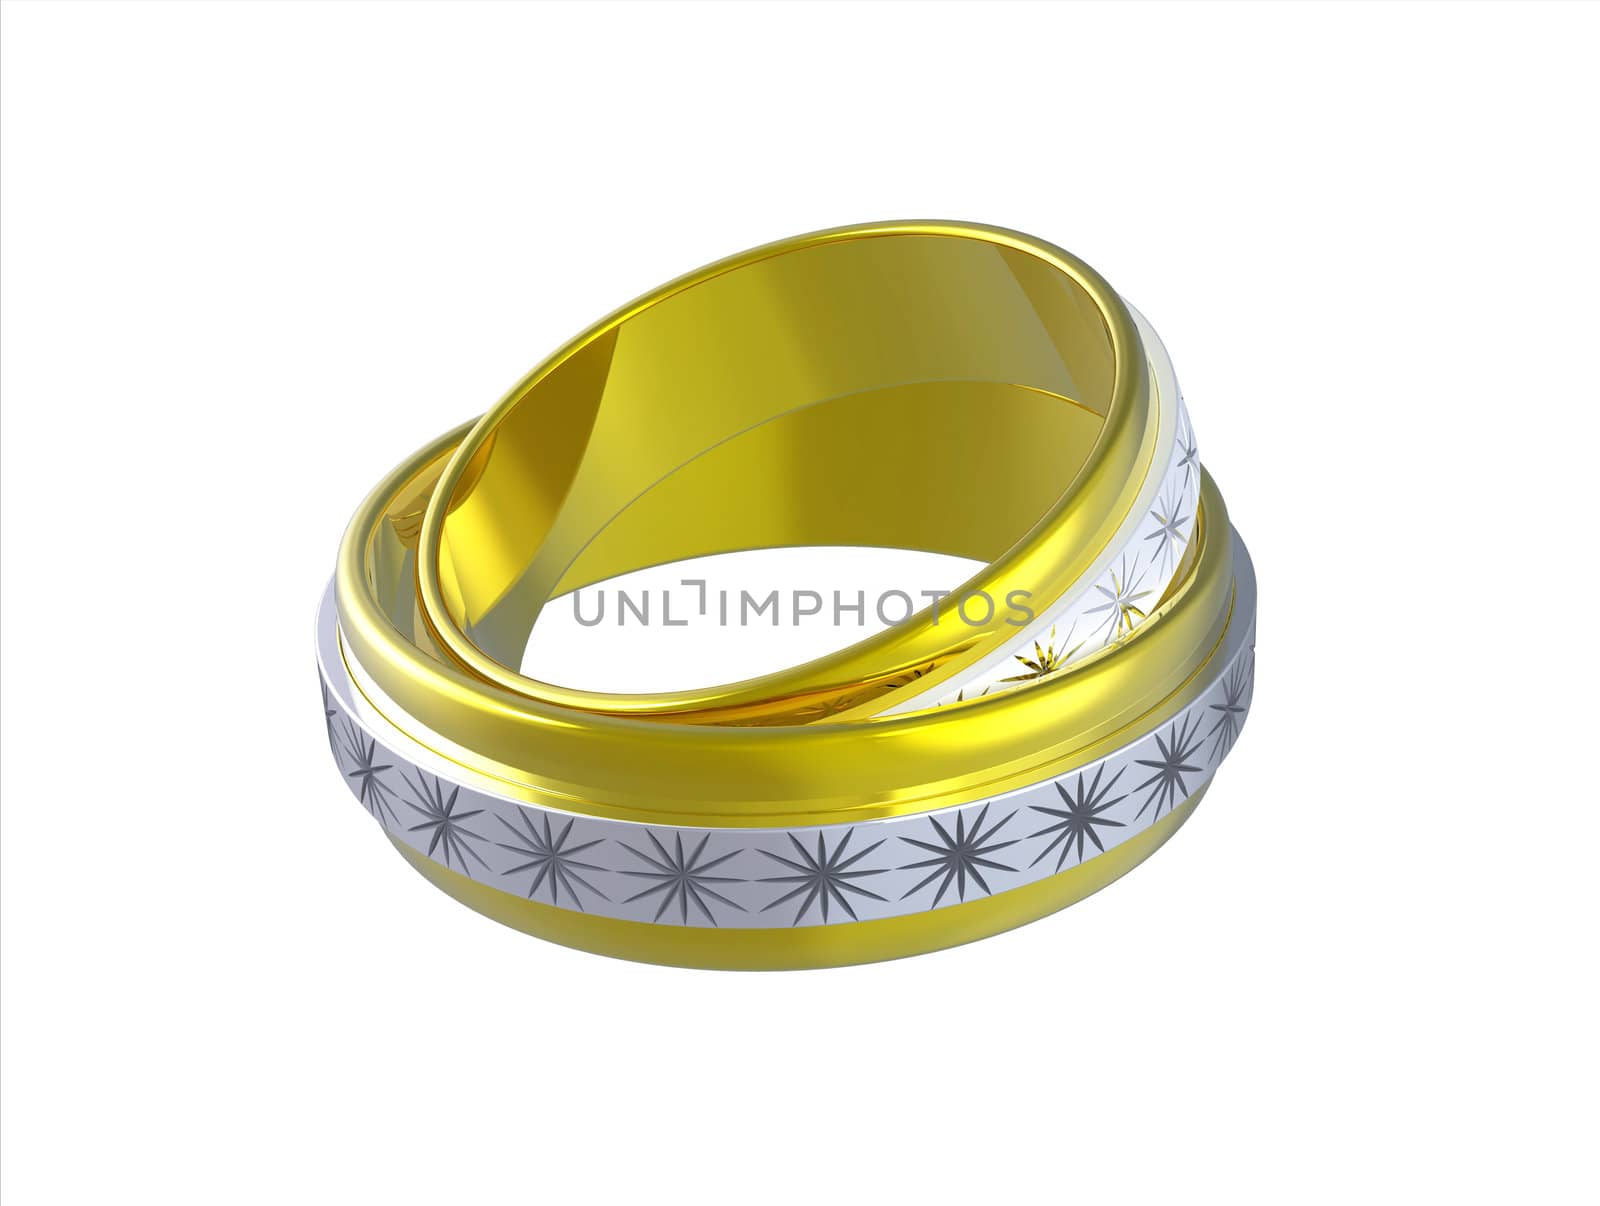 Two wedding rings, render, isolated on white